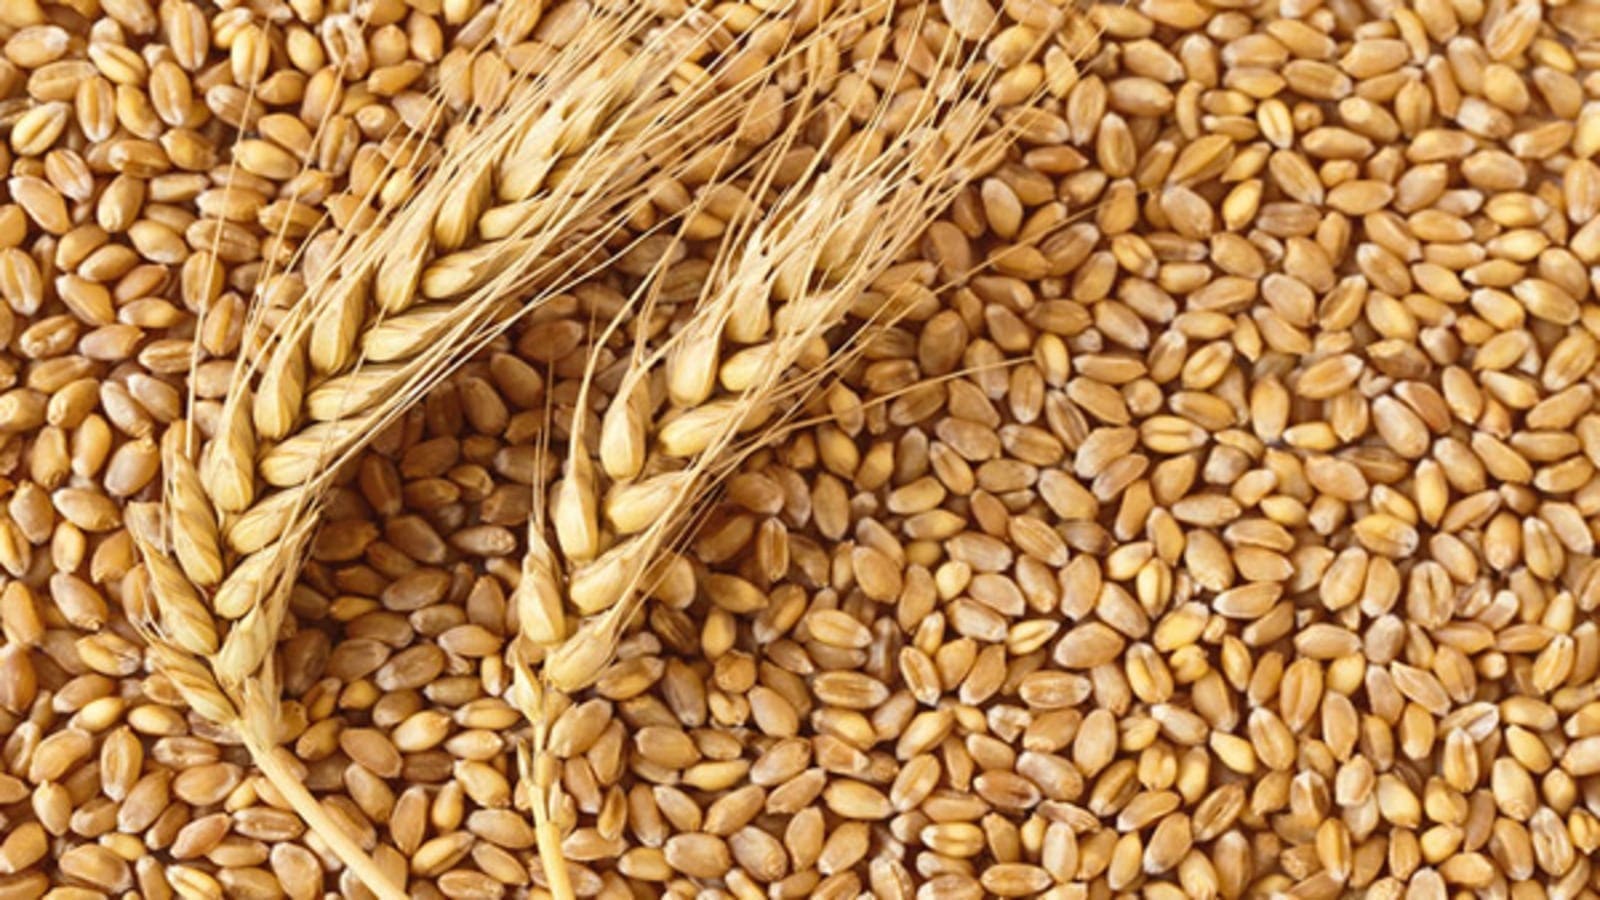 Nigeria wheat value chain players undertake initiative to bolster the sector